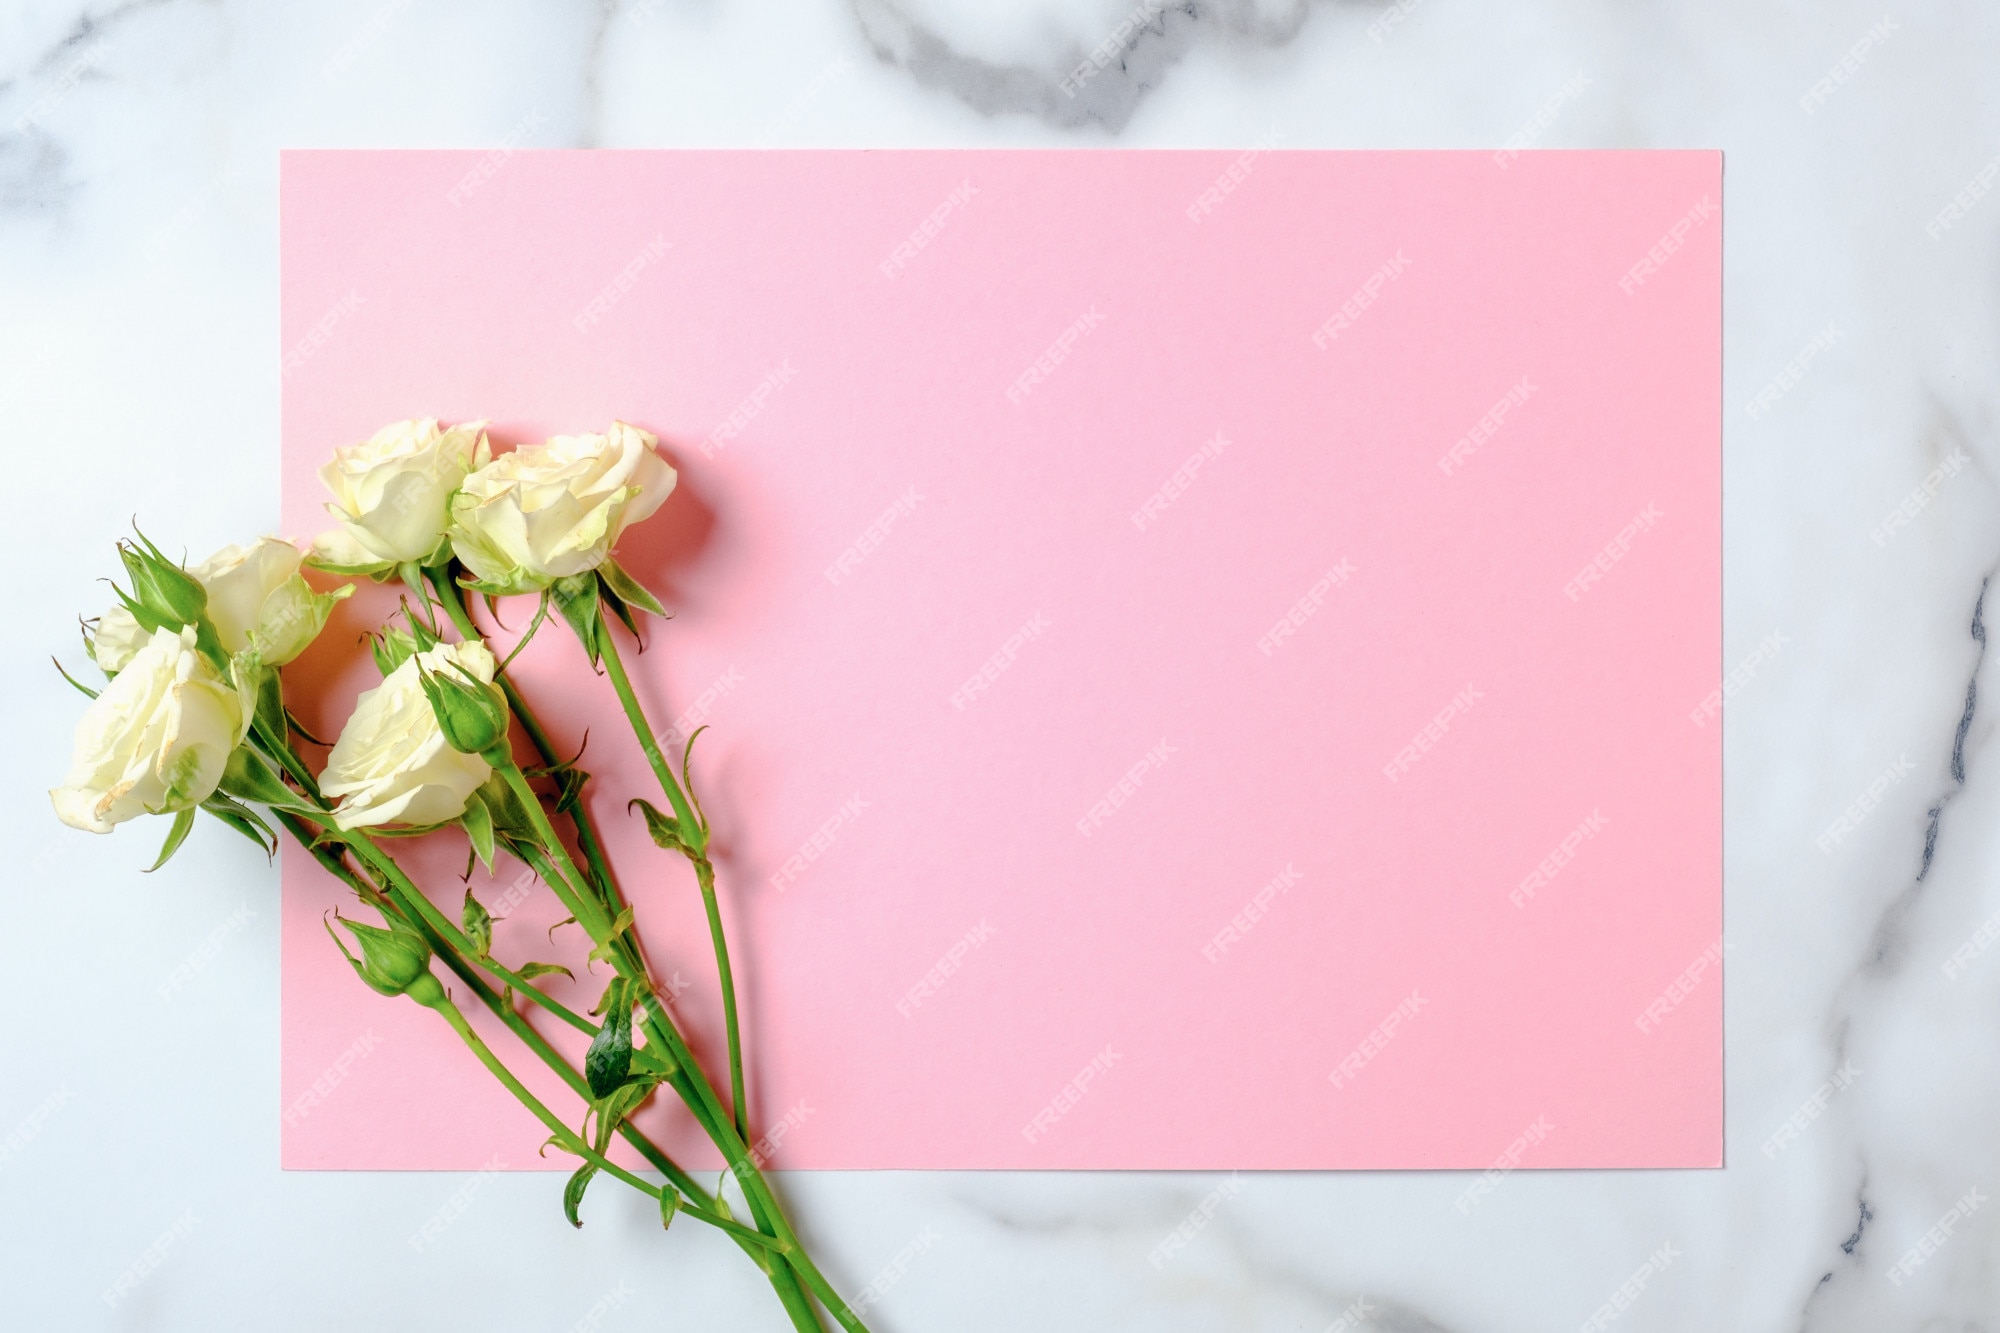 Premium Photo | Wedding invitation card. rose flowers and blank pink paper  card on marble background. wedding concept.